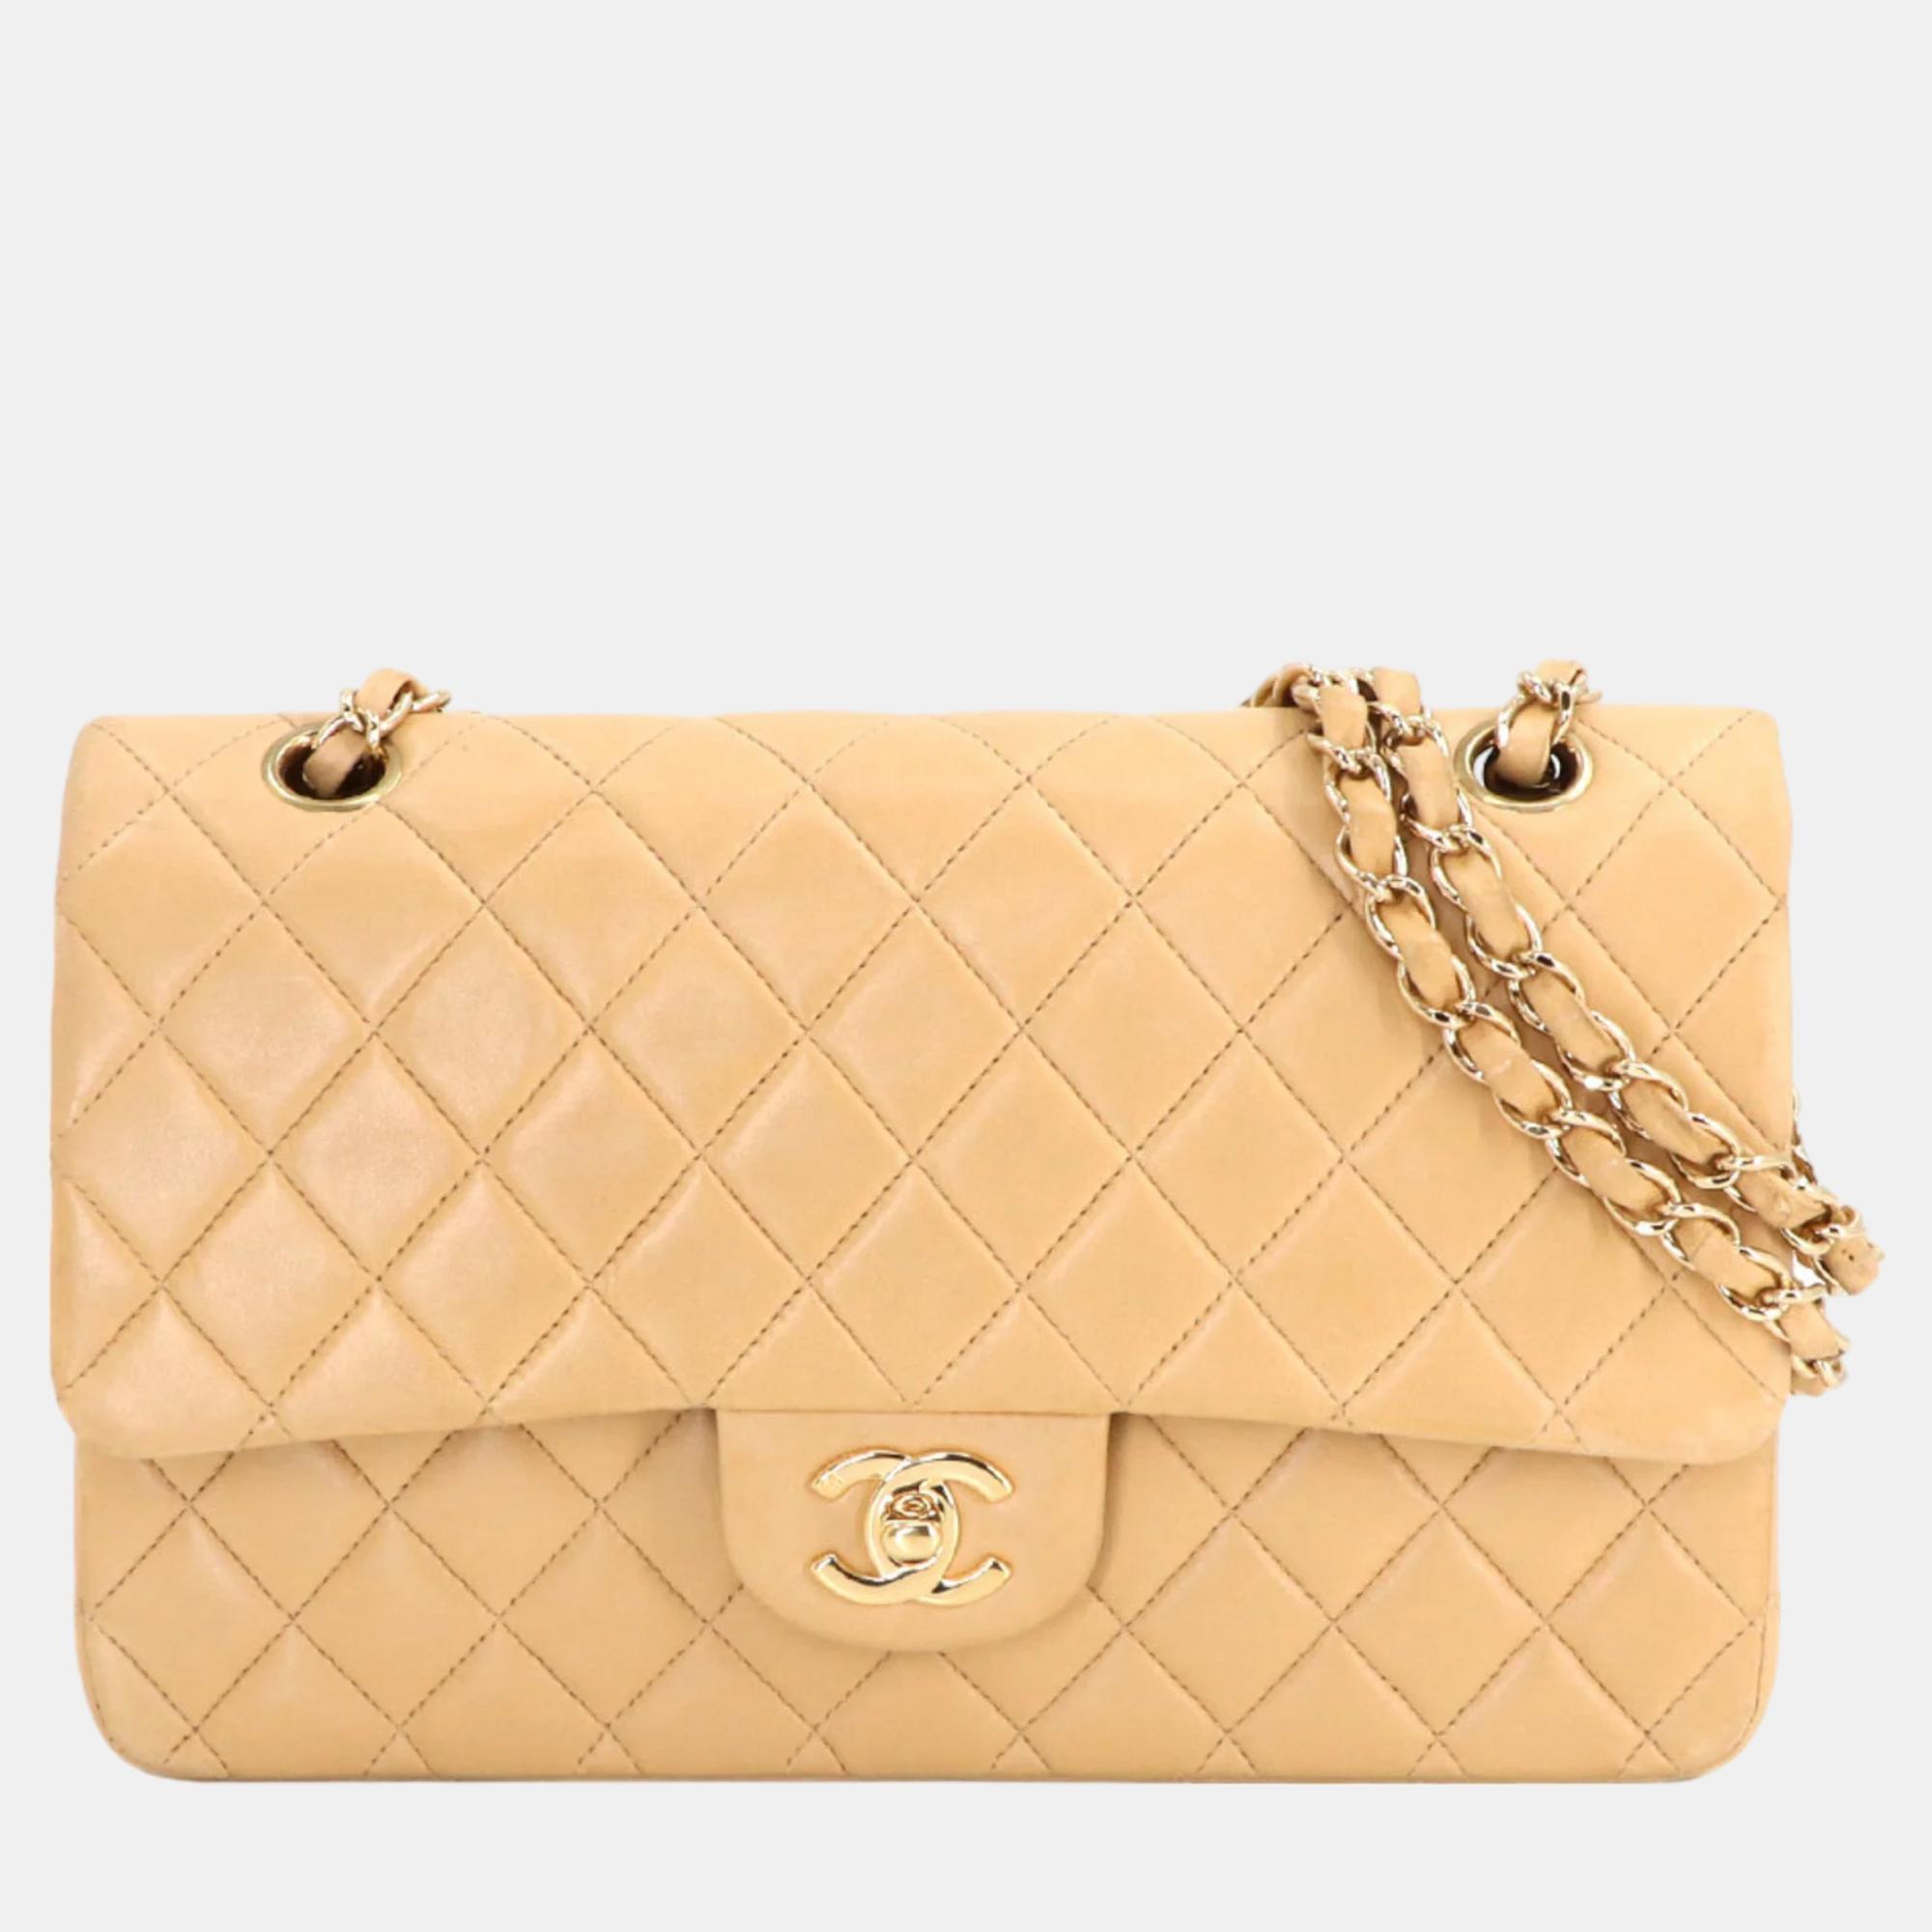 Pre-owned Chanel Beige Lambskin Leather Medium Classic Double Flap Shoulder Bag